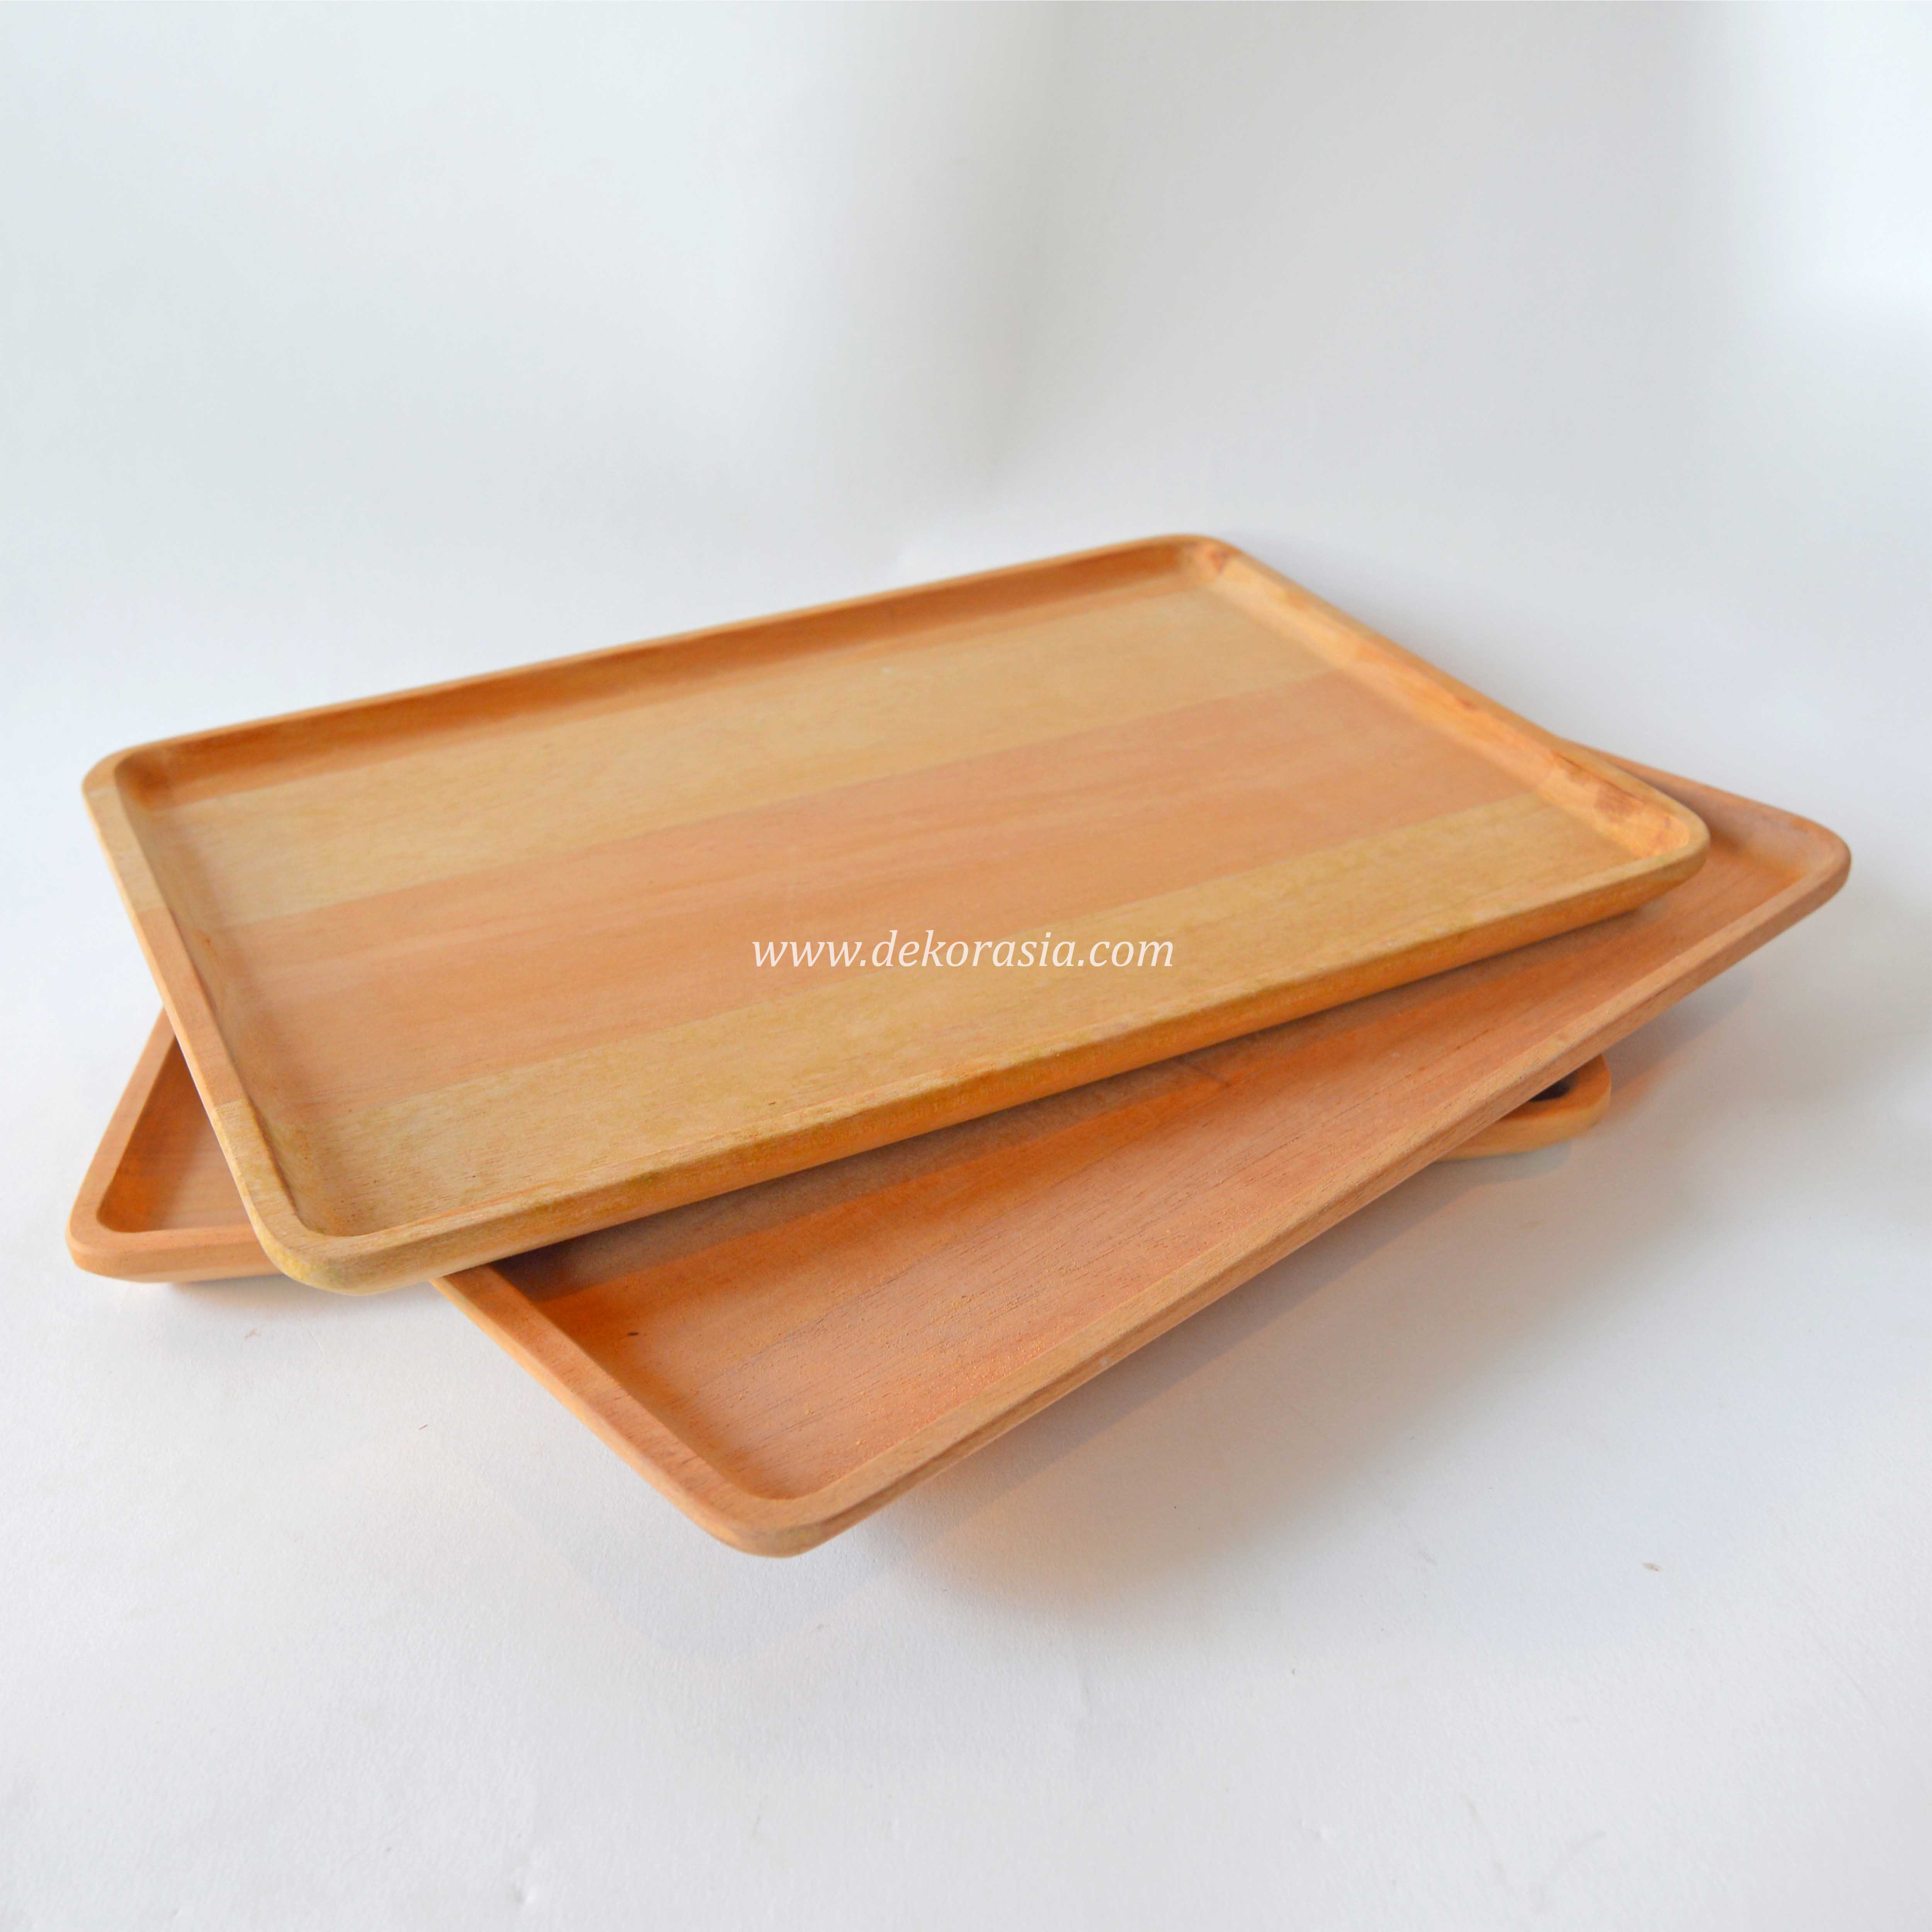 Rectangular Wood Serving Plates, Natural Tableware Dining For Sandwiches, Salad, Finger Foods, Cheese, Burgers